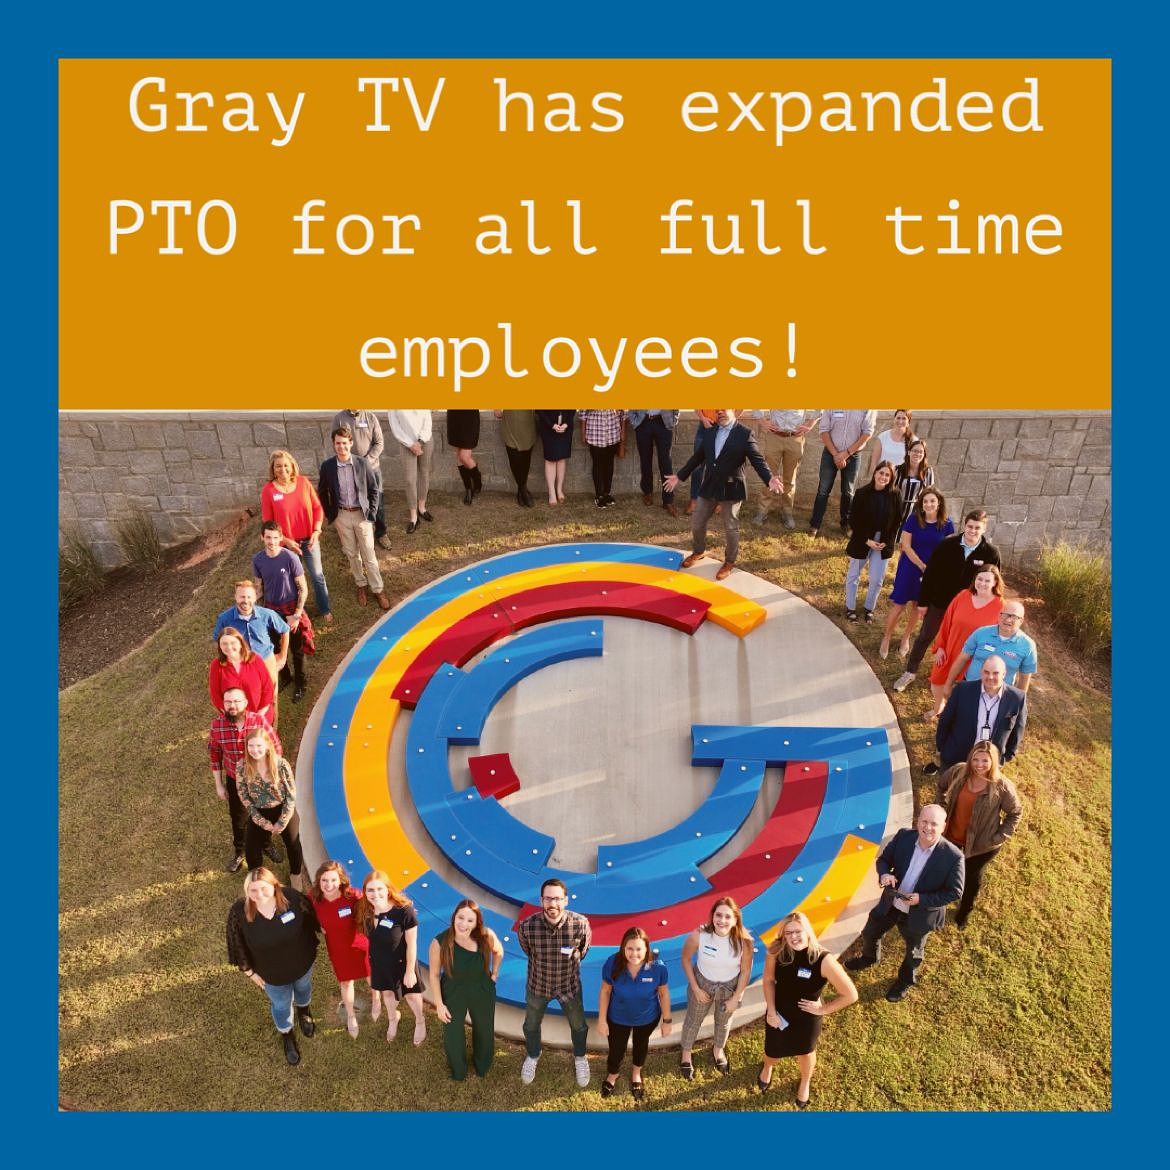 Here’s another reason to #GrowWithGray! In addition to free healthcare options in 2023, we have also expanded PTO for all full time employees. We’re hiring news, sales, marketing and engineering employees nationwide!  Apply at Gray.tv/careers #TVJobs